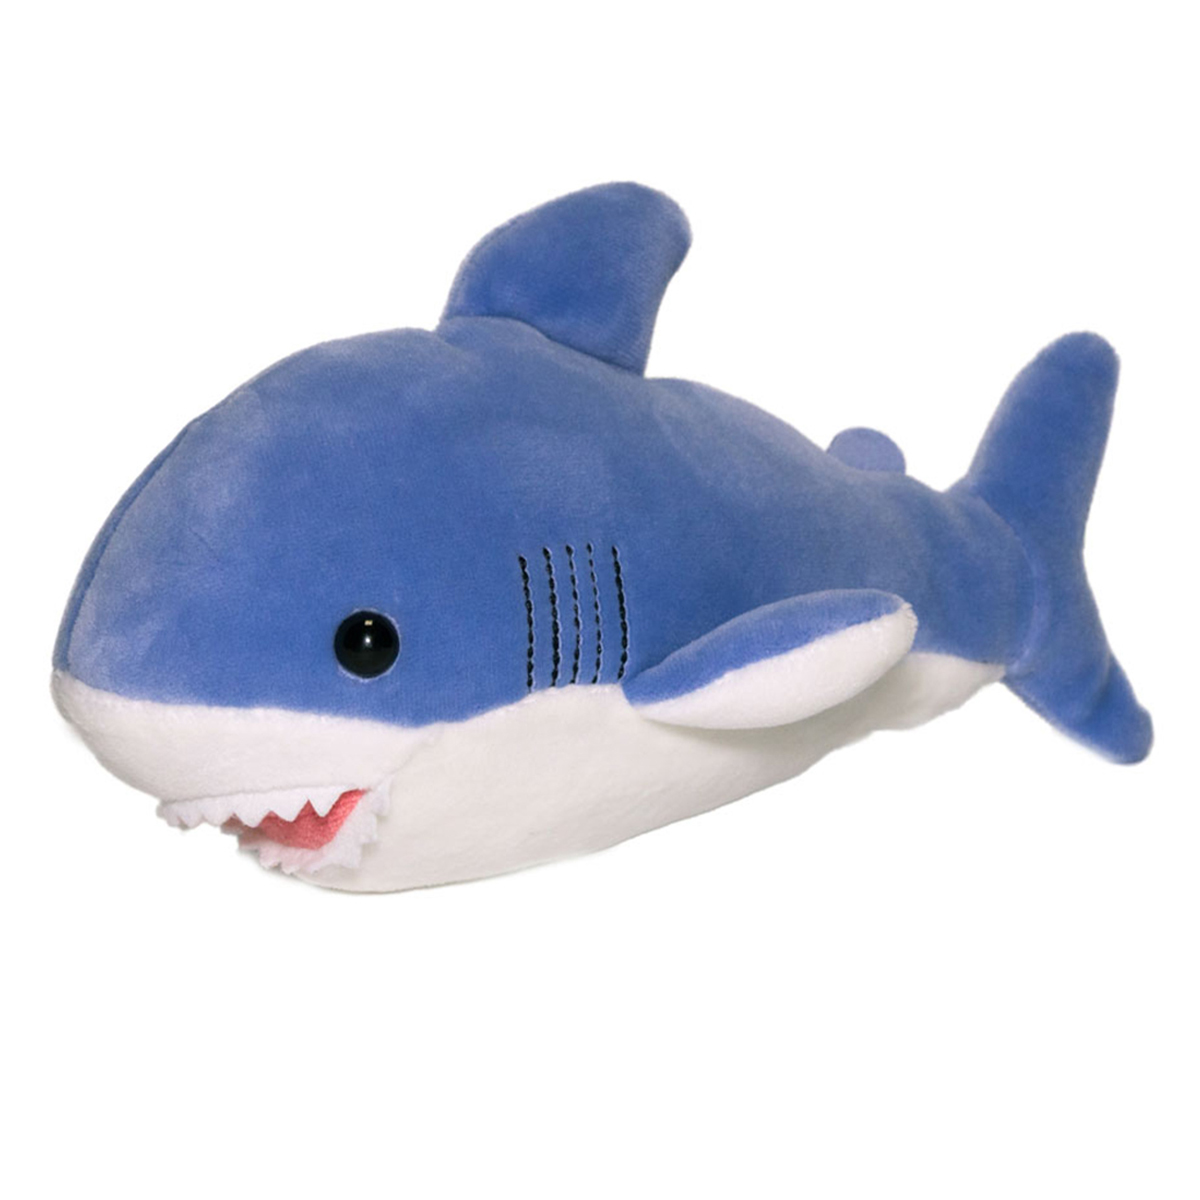 Shark Plush Toy Aquarium Colorful Collection Stuffed Animal Navy Blue 8 Inches